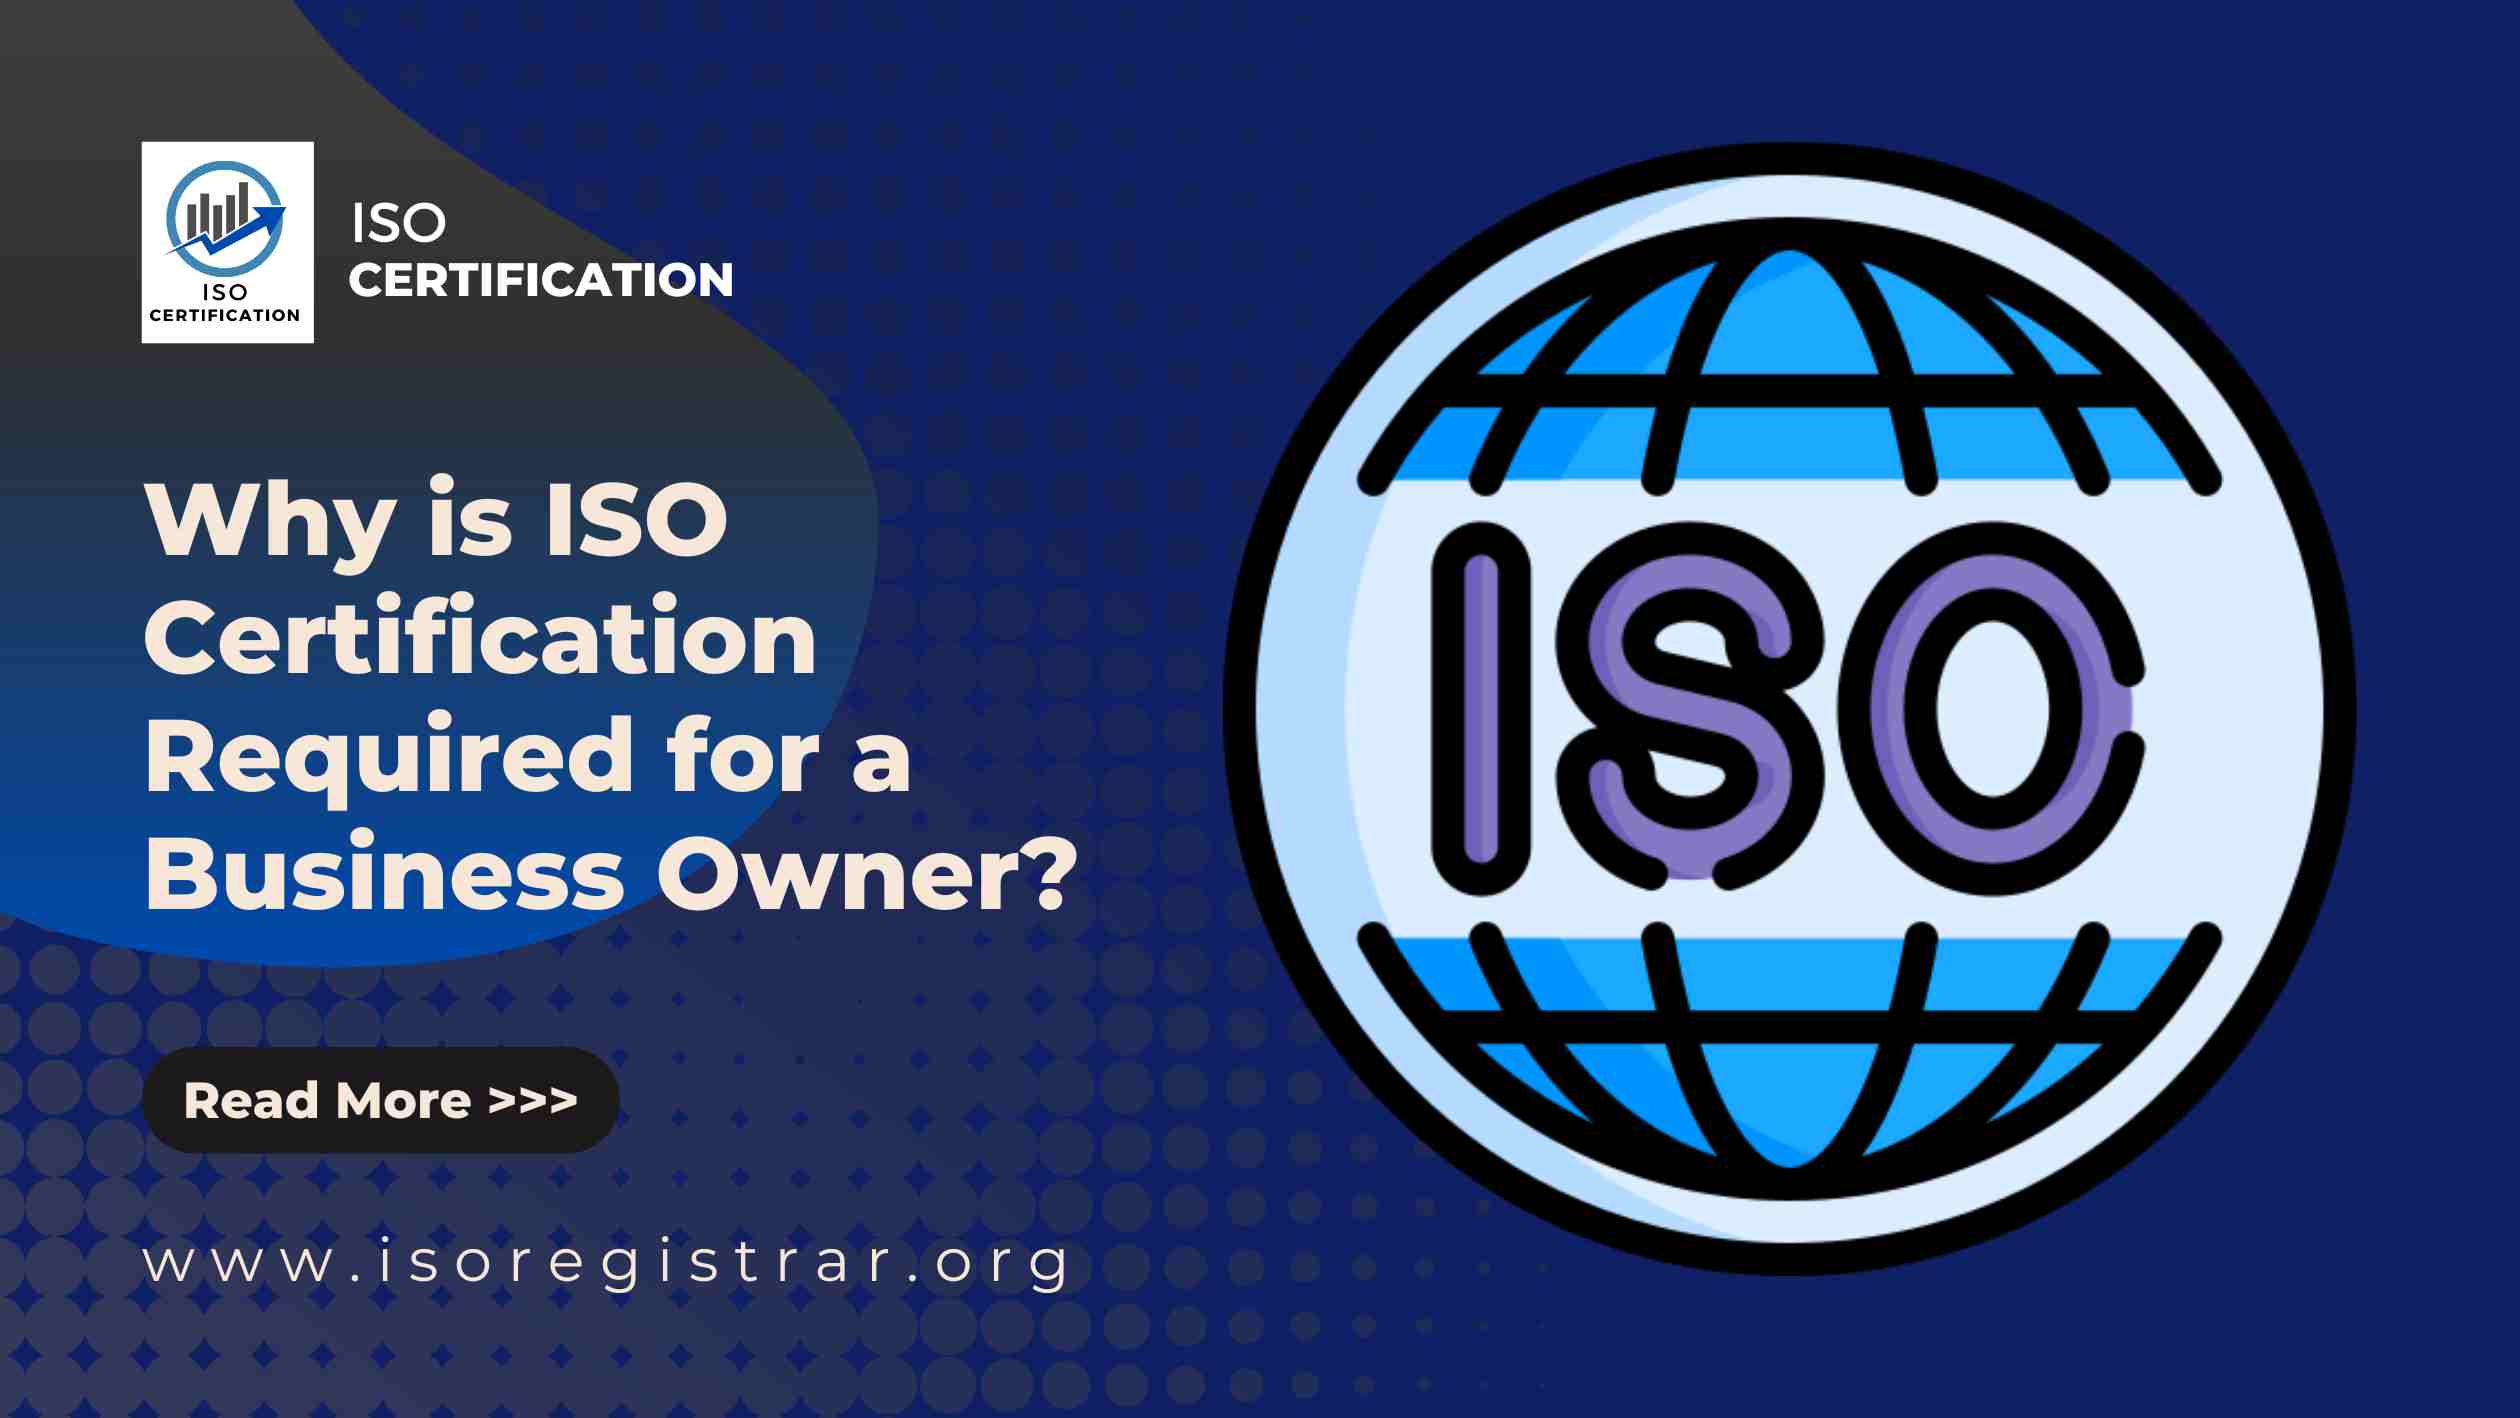 ISO Certification Required for a Business Owner